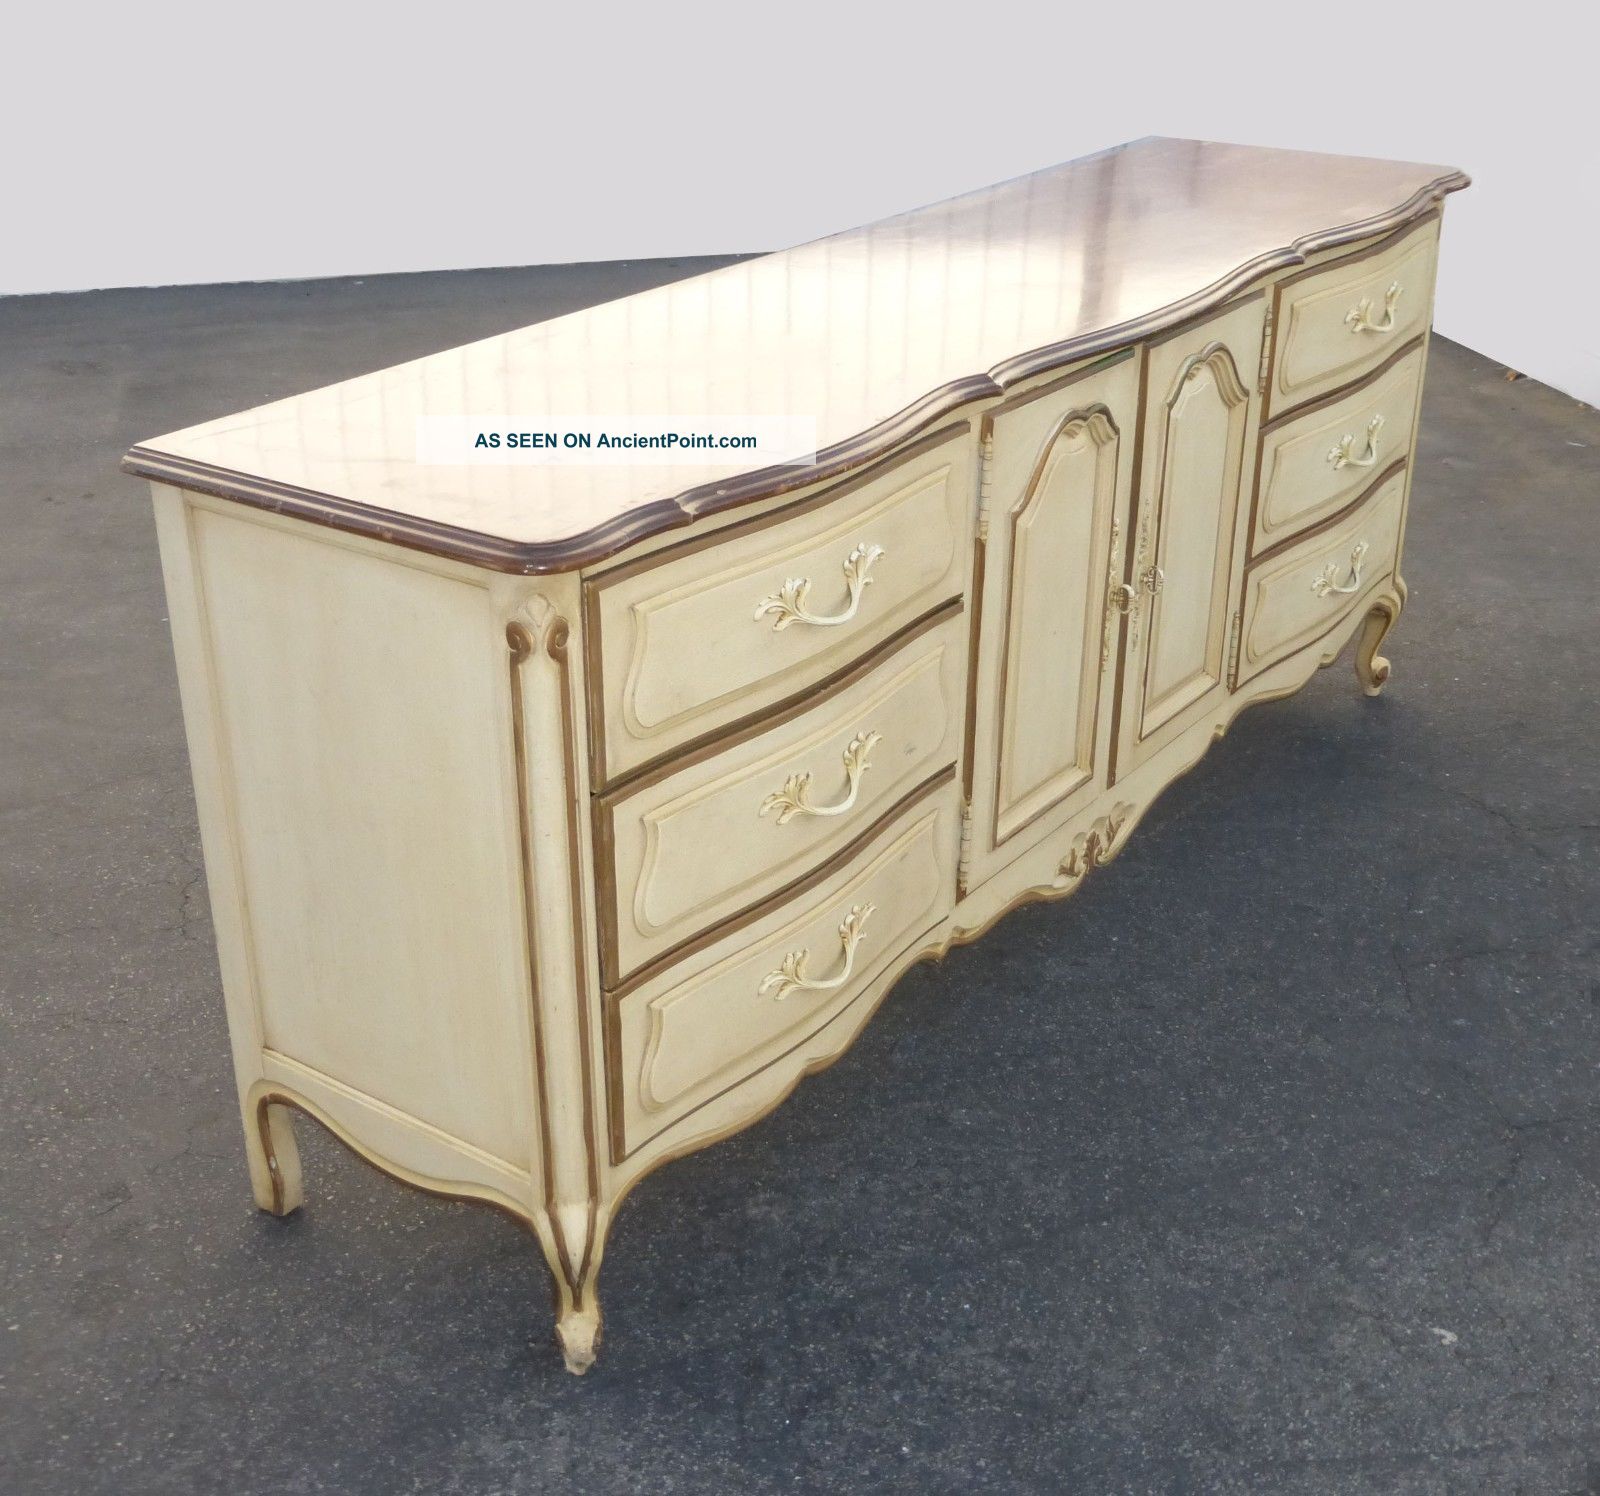 Vintage French Provincial Wood Dresser Cream Color With Gold